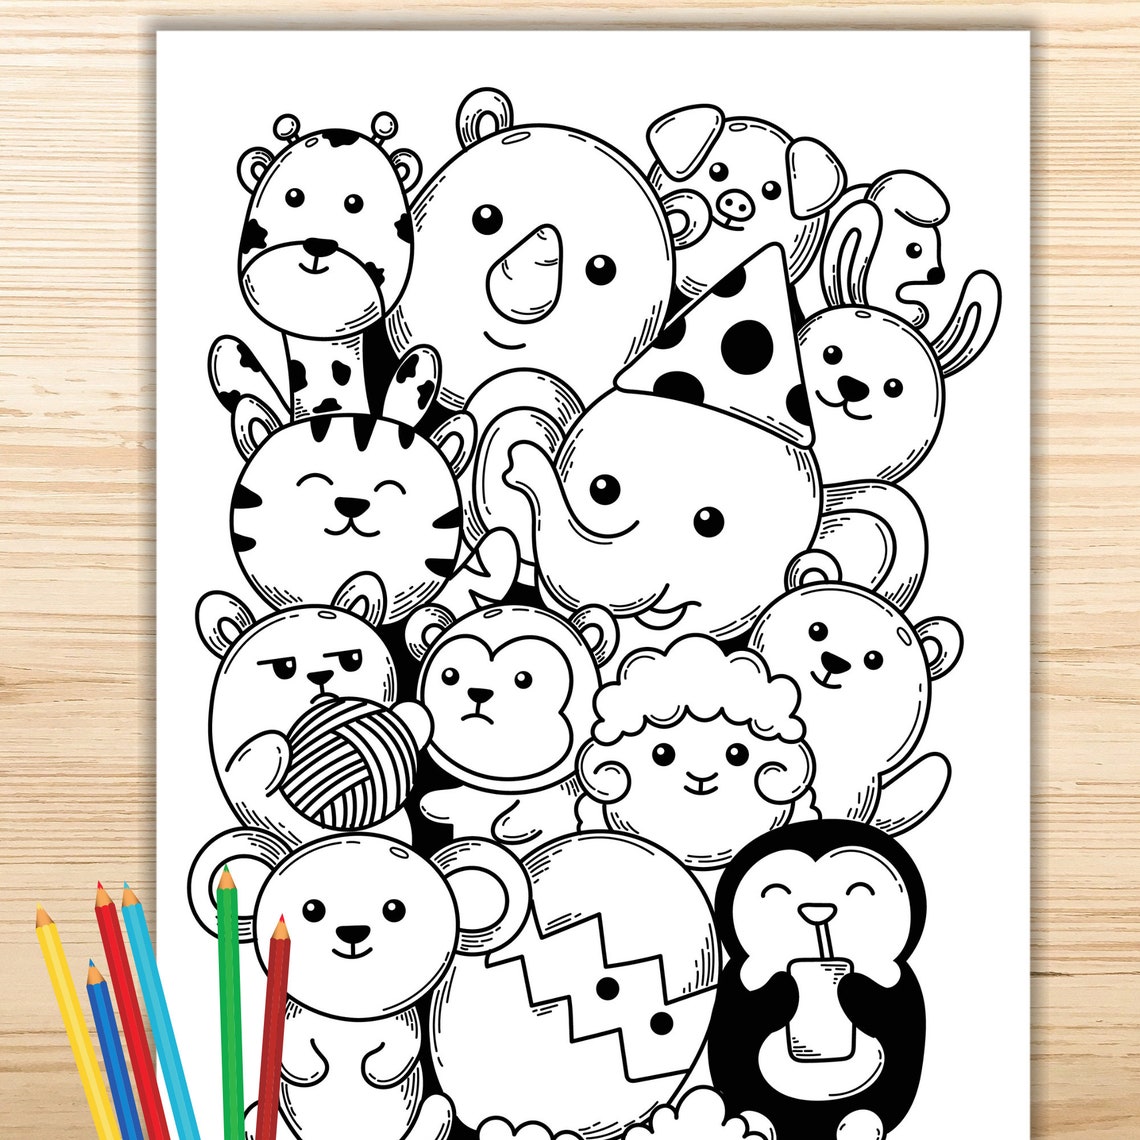 Animal Doodle Coloring Page Printable Coloring Page for Kids | Etsy